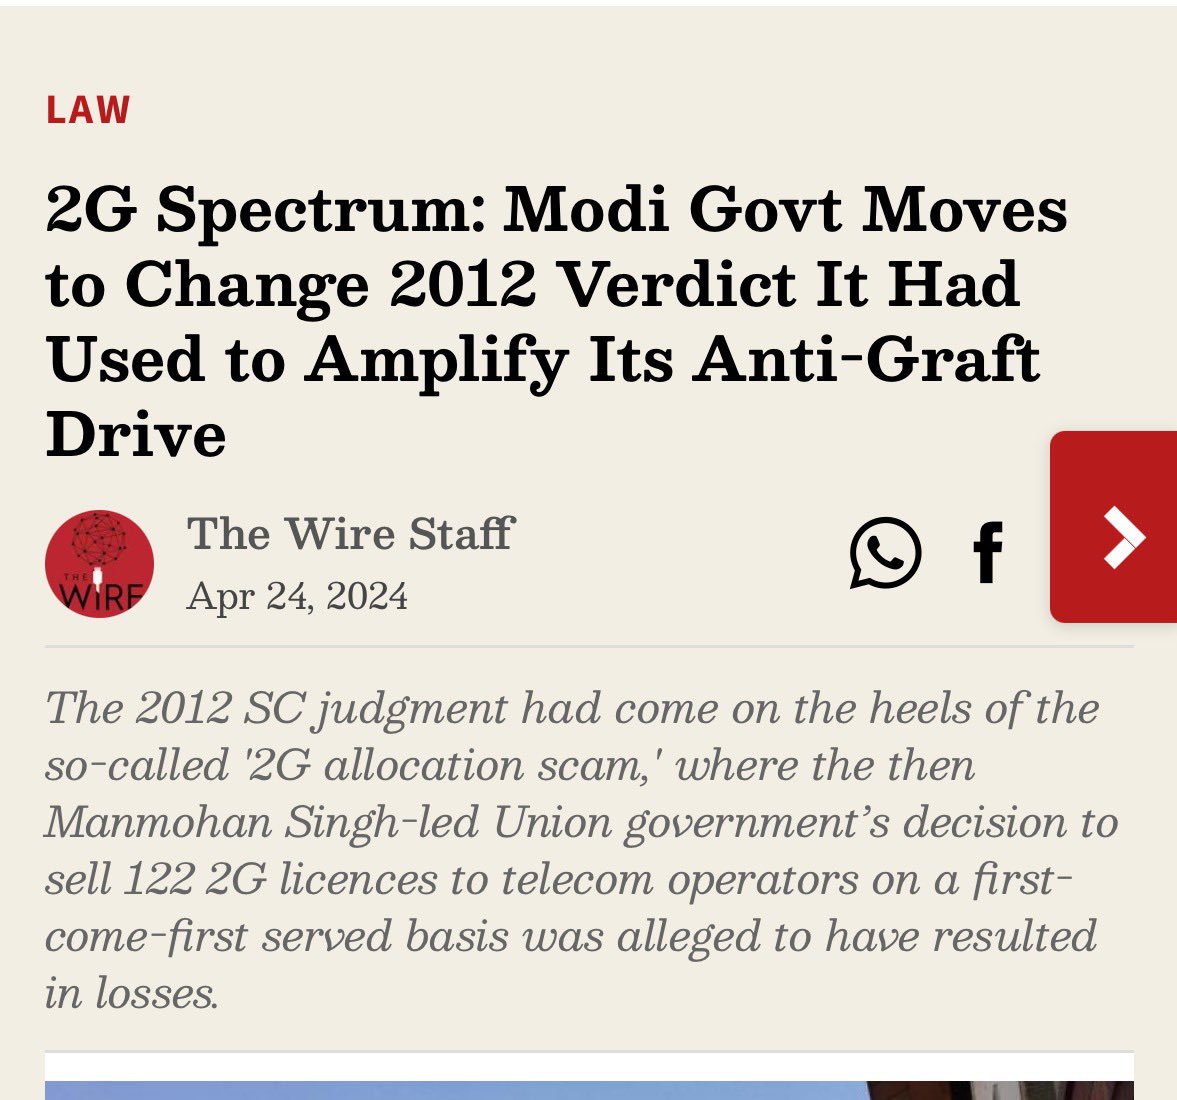 The hypocrisy of the Modi Sarkar and Bhrasht Janata Party knows no bounds. During Dr. Manmohan Singh’s tenure, they cried to all who would listen that the administrative allocation of 2G spectrum was a “scam”. Now, they are arguing the opposite - they have gone to the Supreme…